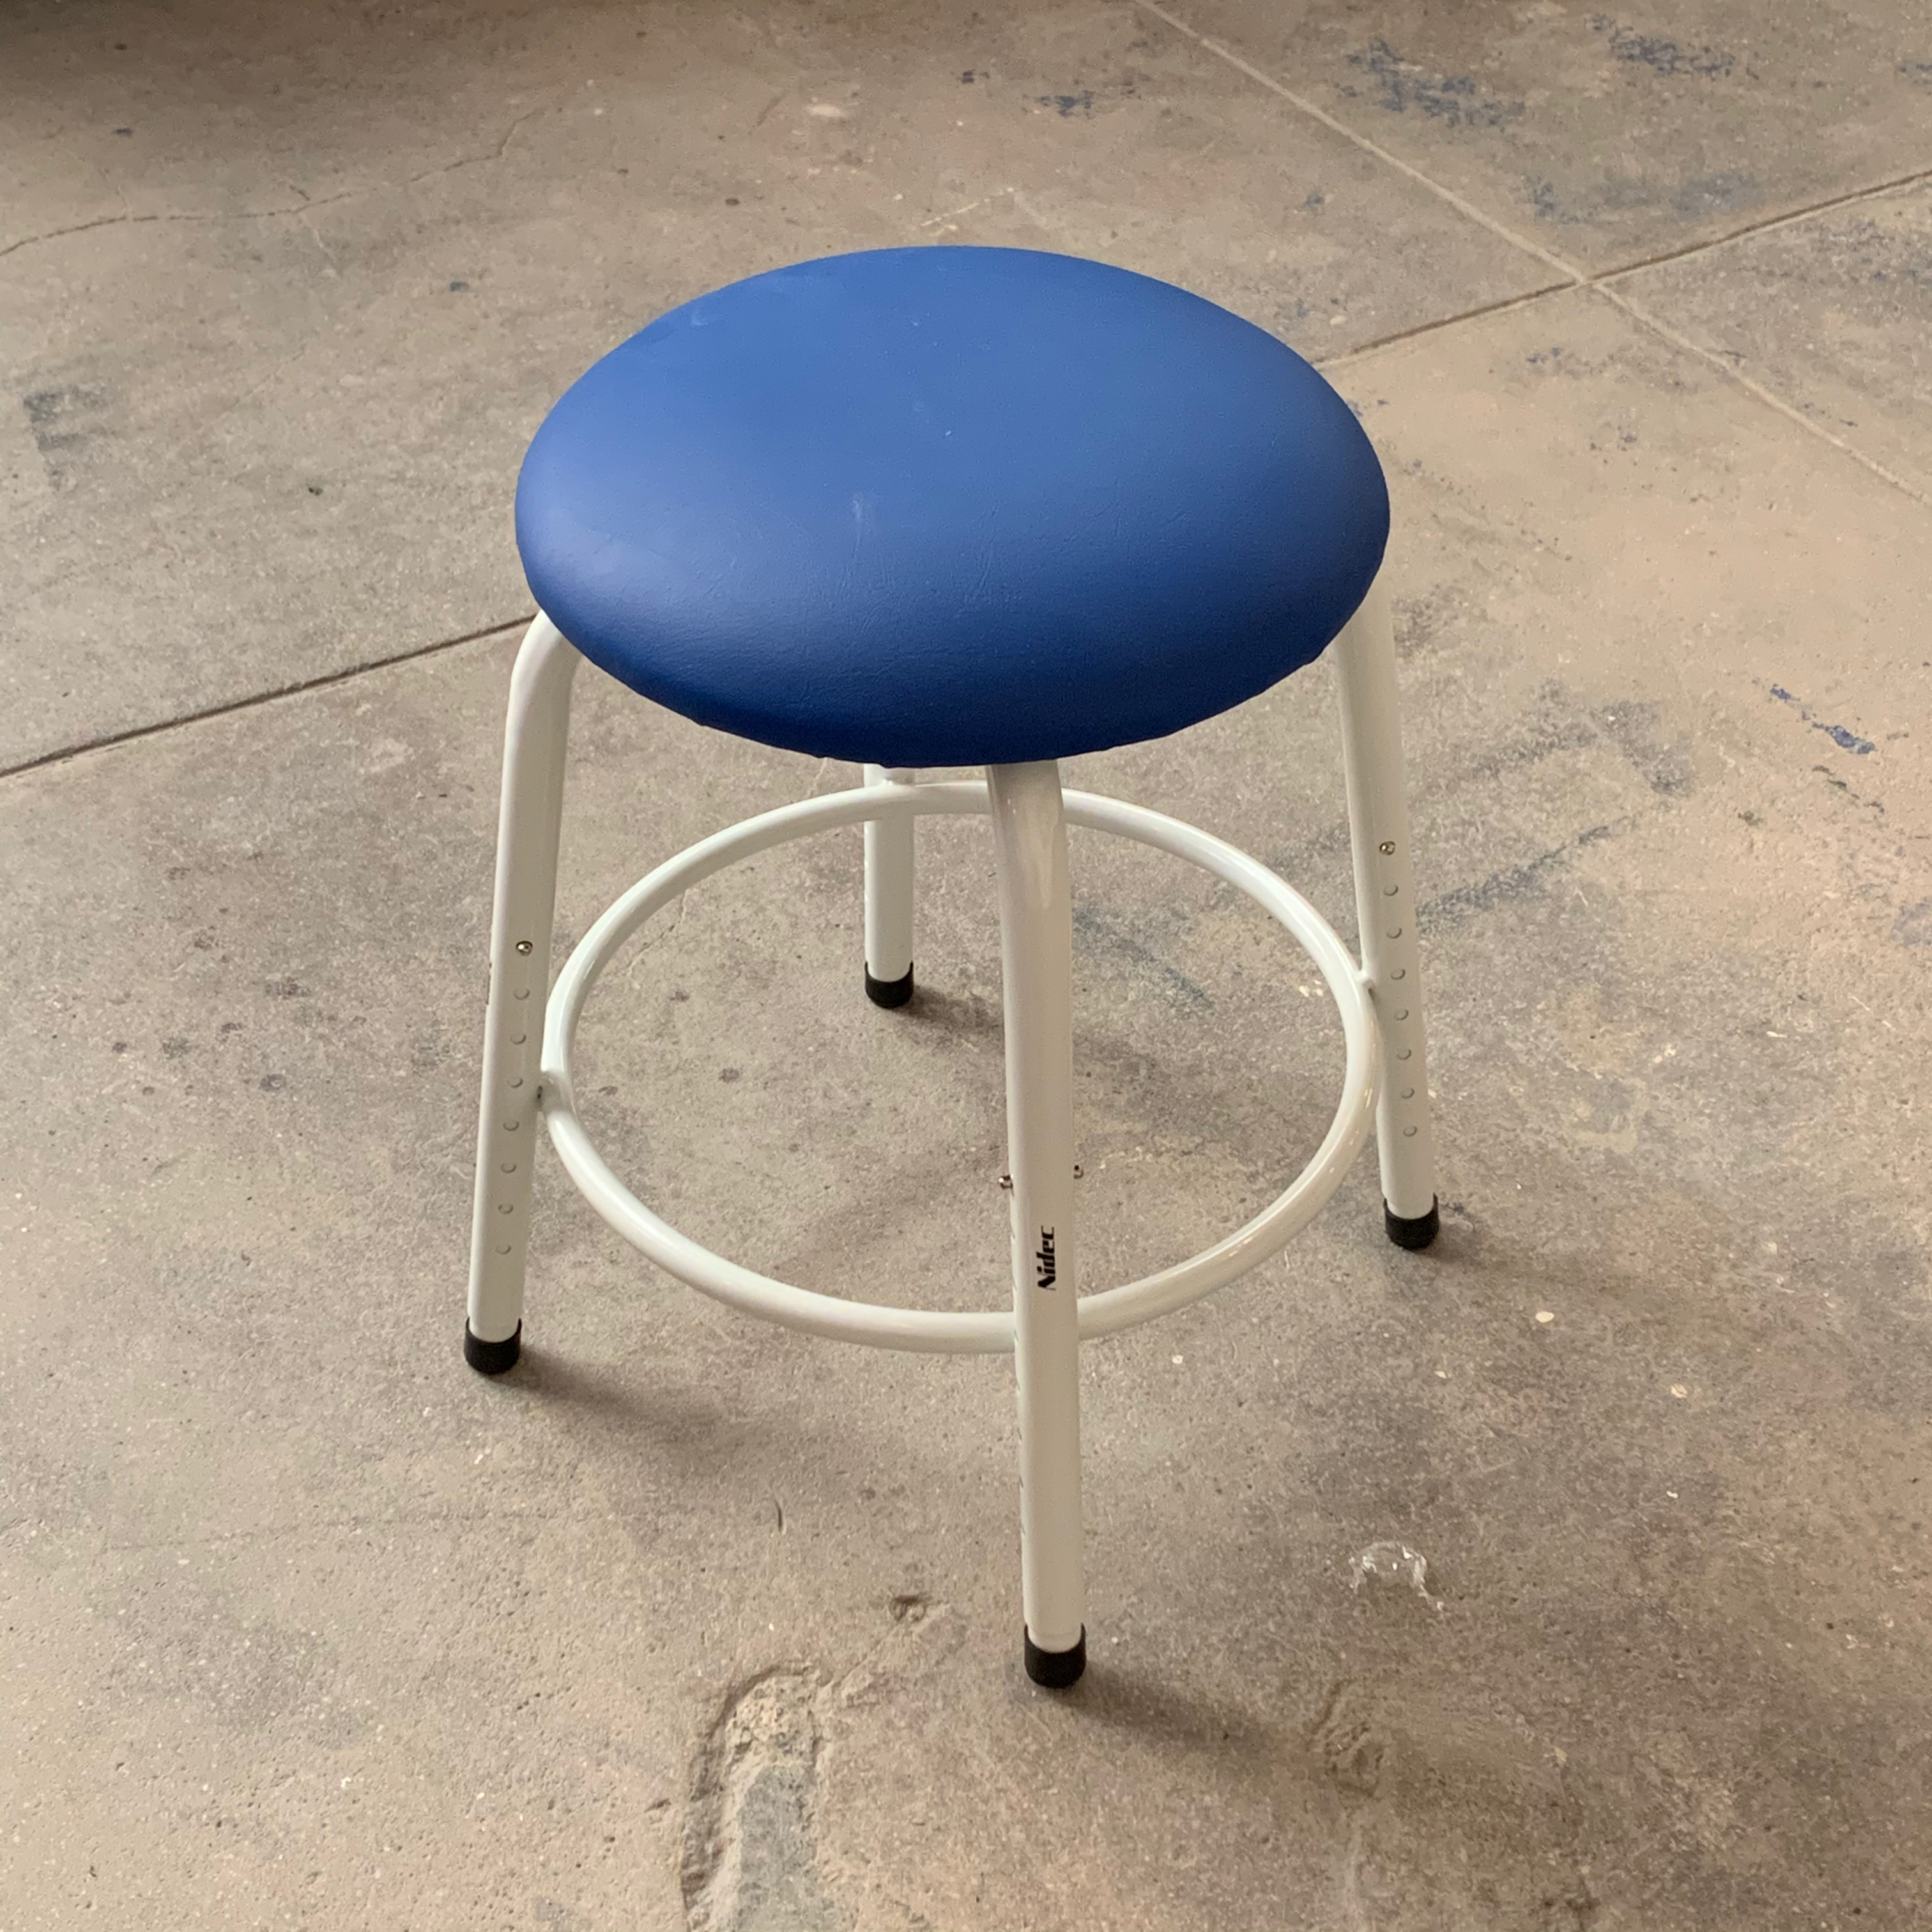 Shimpo Potter's Stool - Cushioned Top and Adjustable Legs